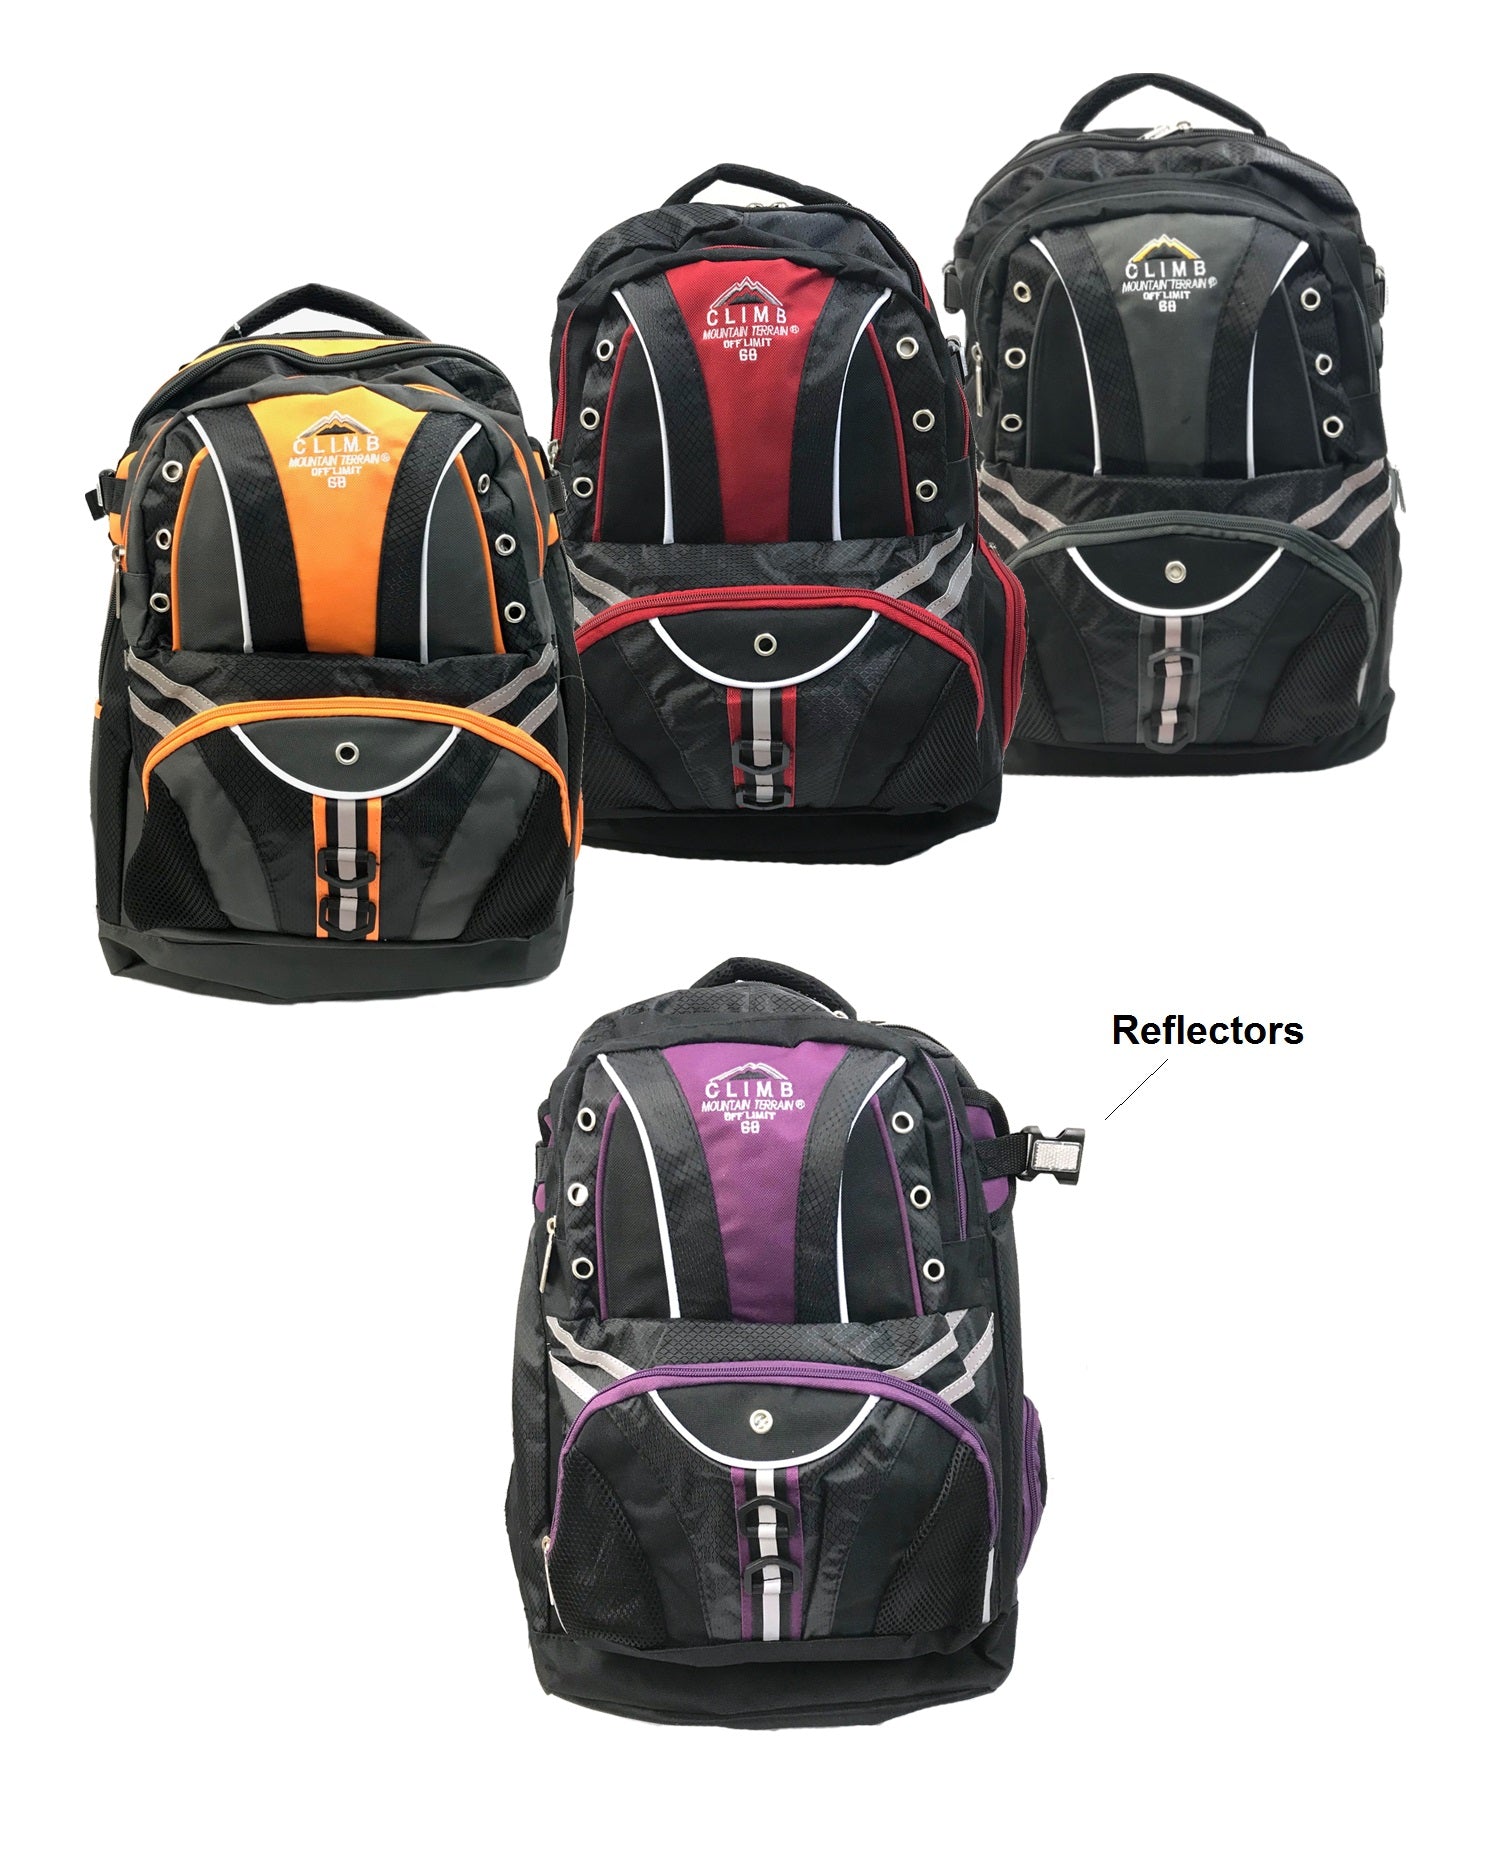 Mountain Terrain 17" Backpack in Assorted Colors